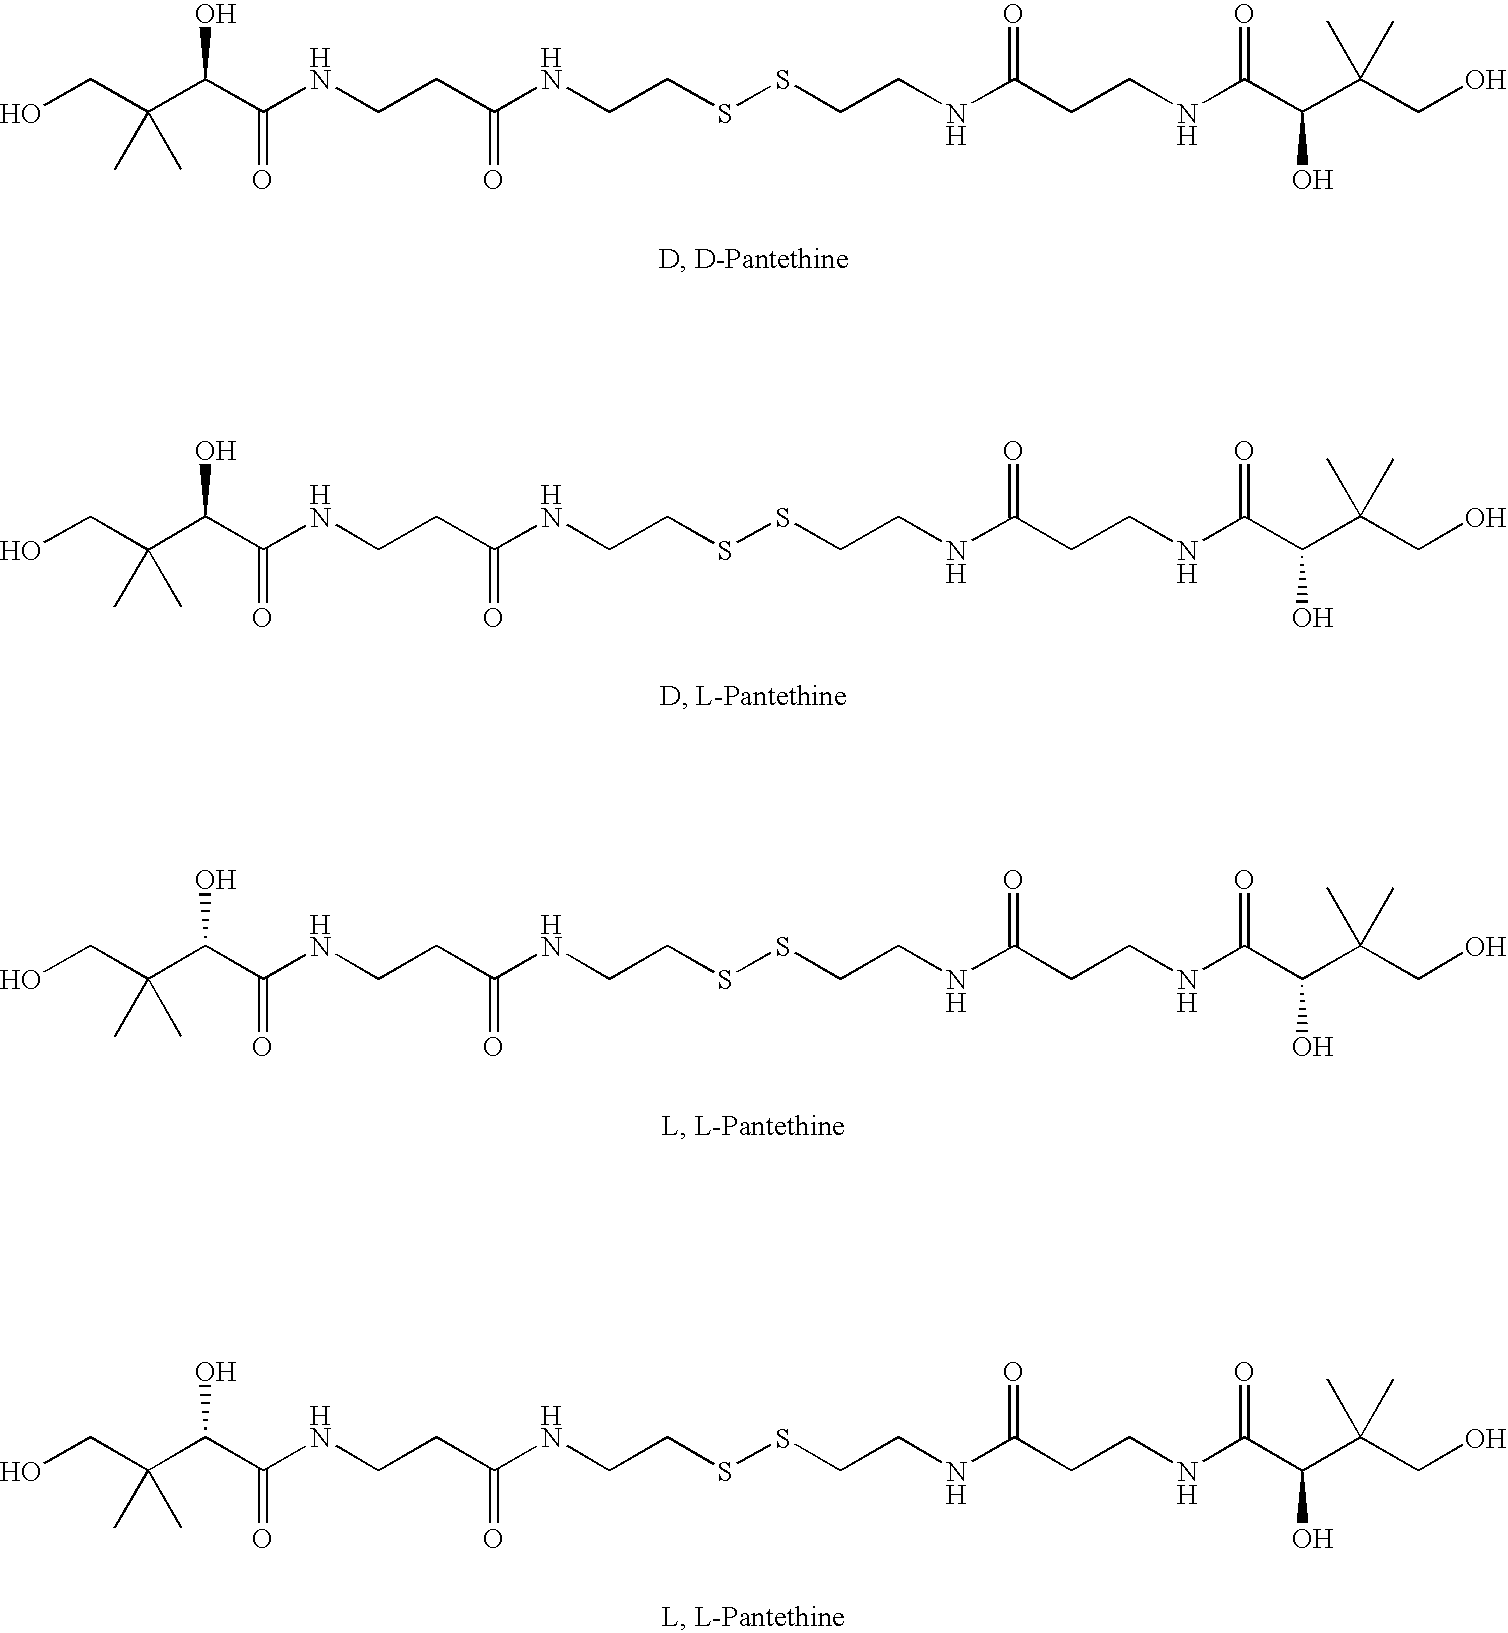 Pharmaceutical compositions and methods for treating, preventing, and managing cholesterol, dyslipidemia, and related disorders